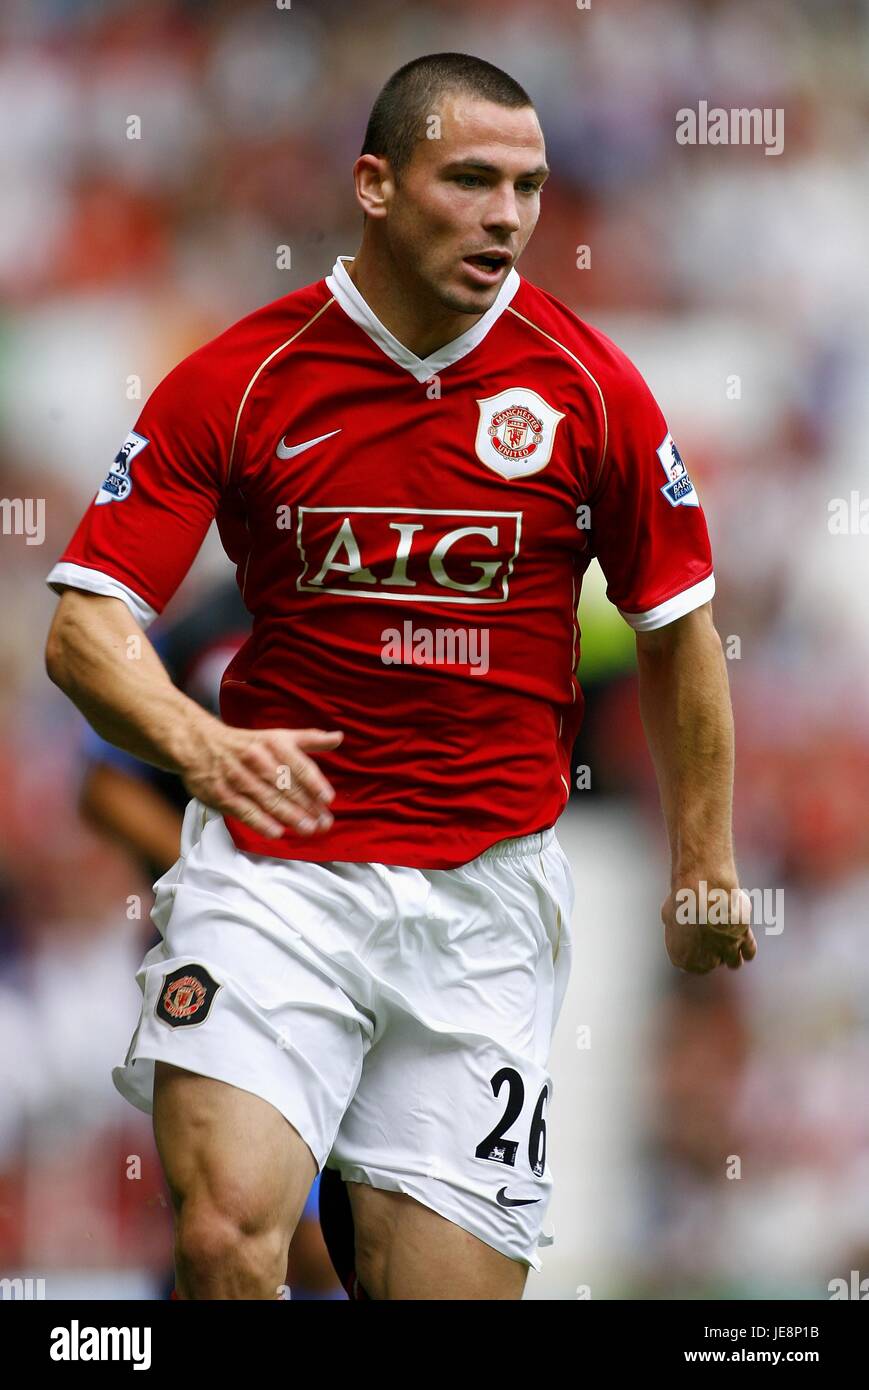 PHIL BARDSLEY MANCHESTER UNITED FC OLD TRAFFORD MANCHESTER ENGLAND 12  August 2006 Stock Photo - Alamy